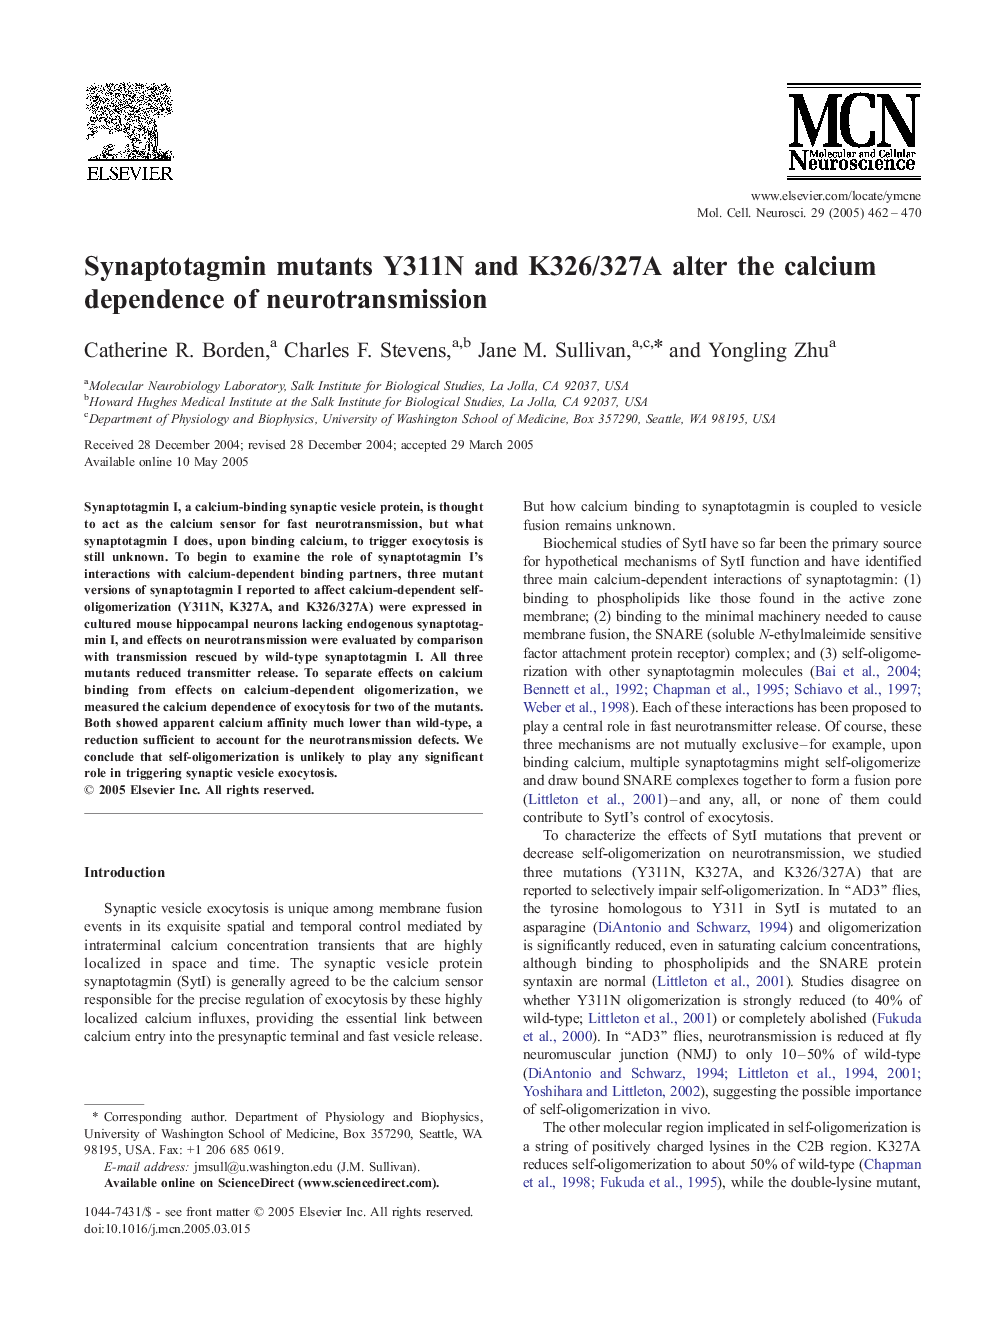 Synaptotagmin mutants Y311N and K326/327A alter the calcium dependence of neurotransmission